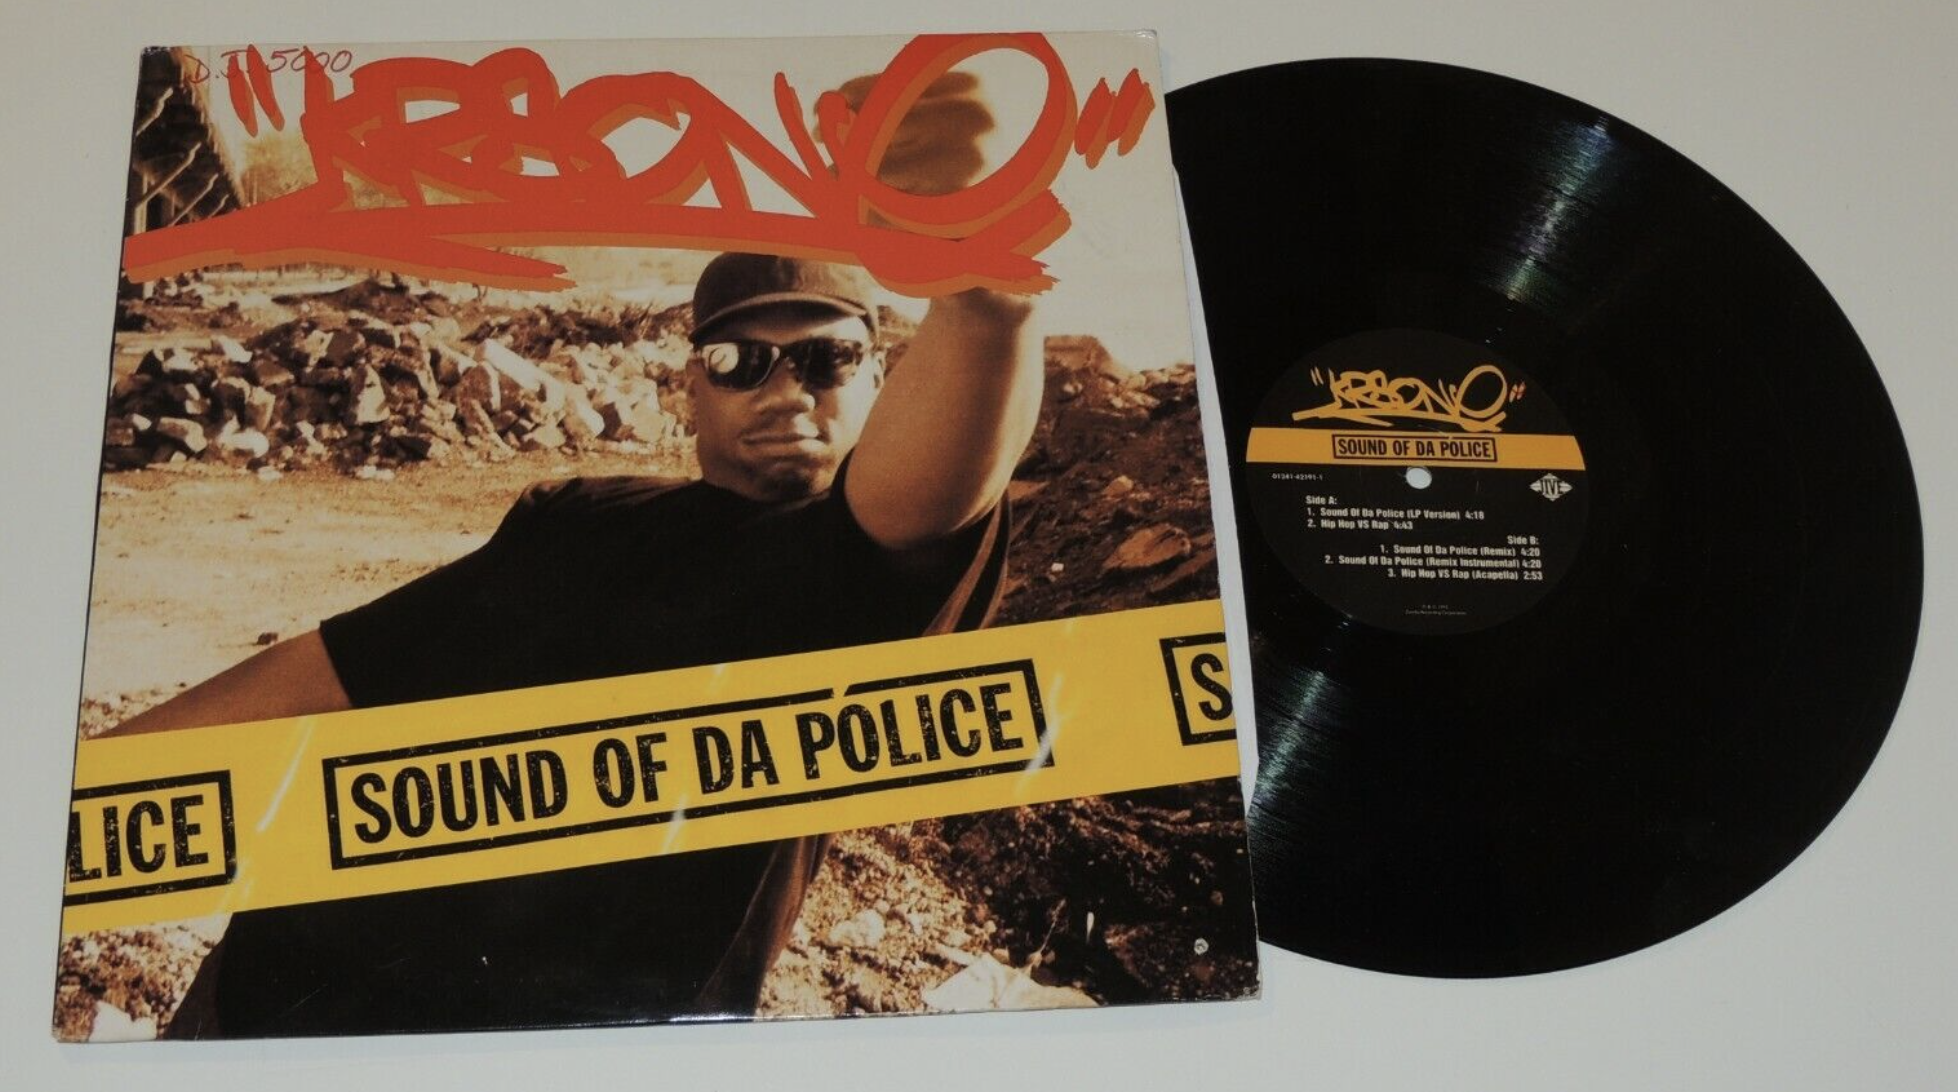 Officer – Overseer in KRS-One’s “Sound of da Police” – Psuedo-Etymological Fallacy